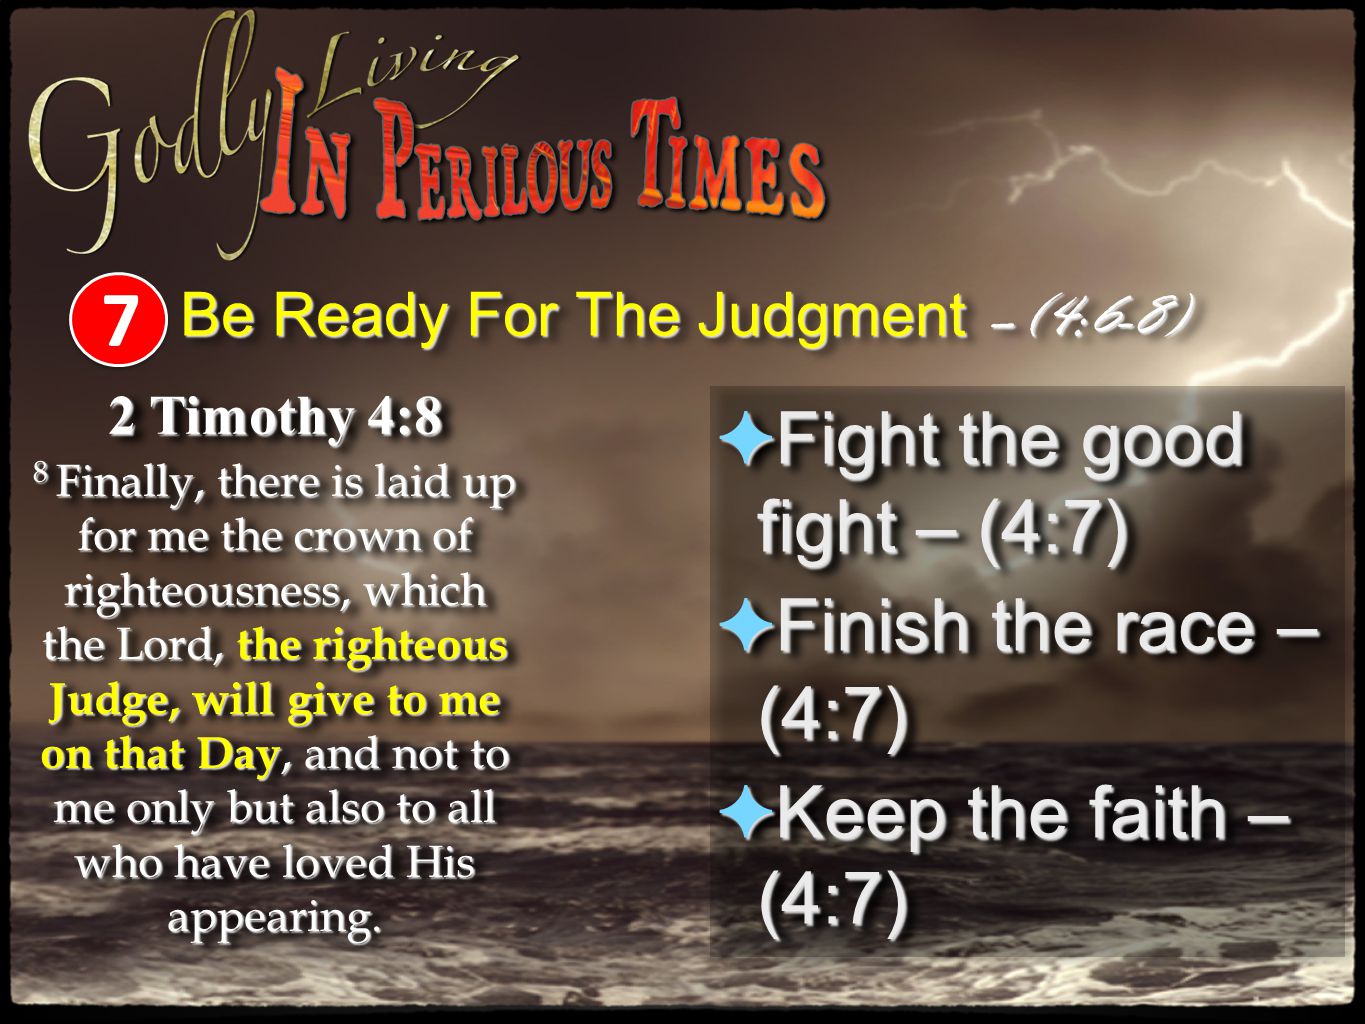 Be Ready For The Judgment –(4:6-8)